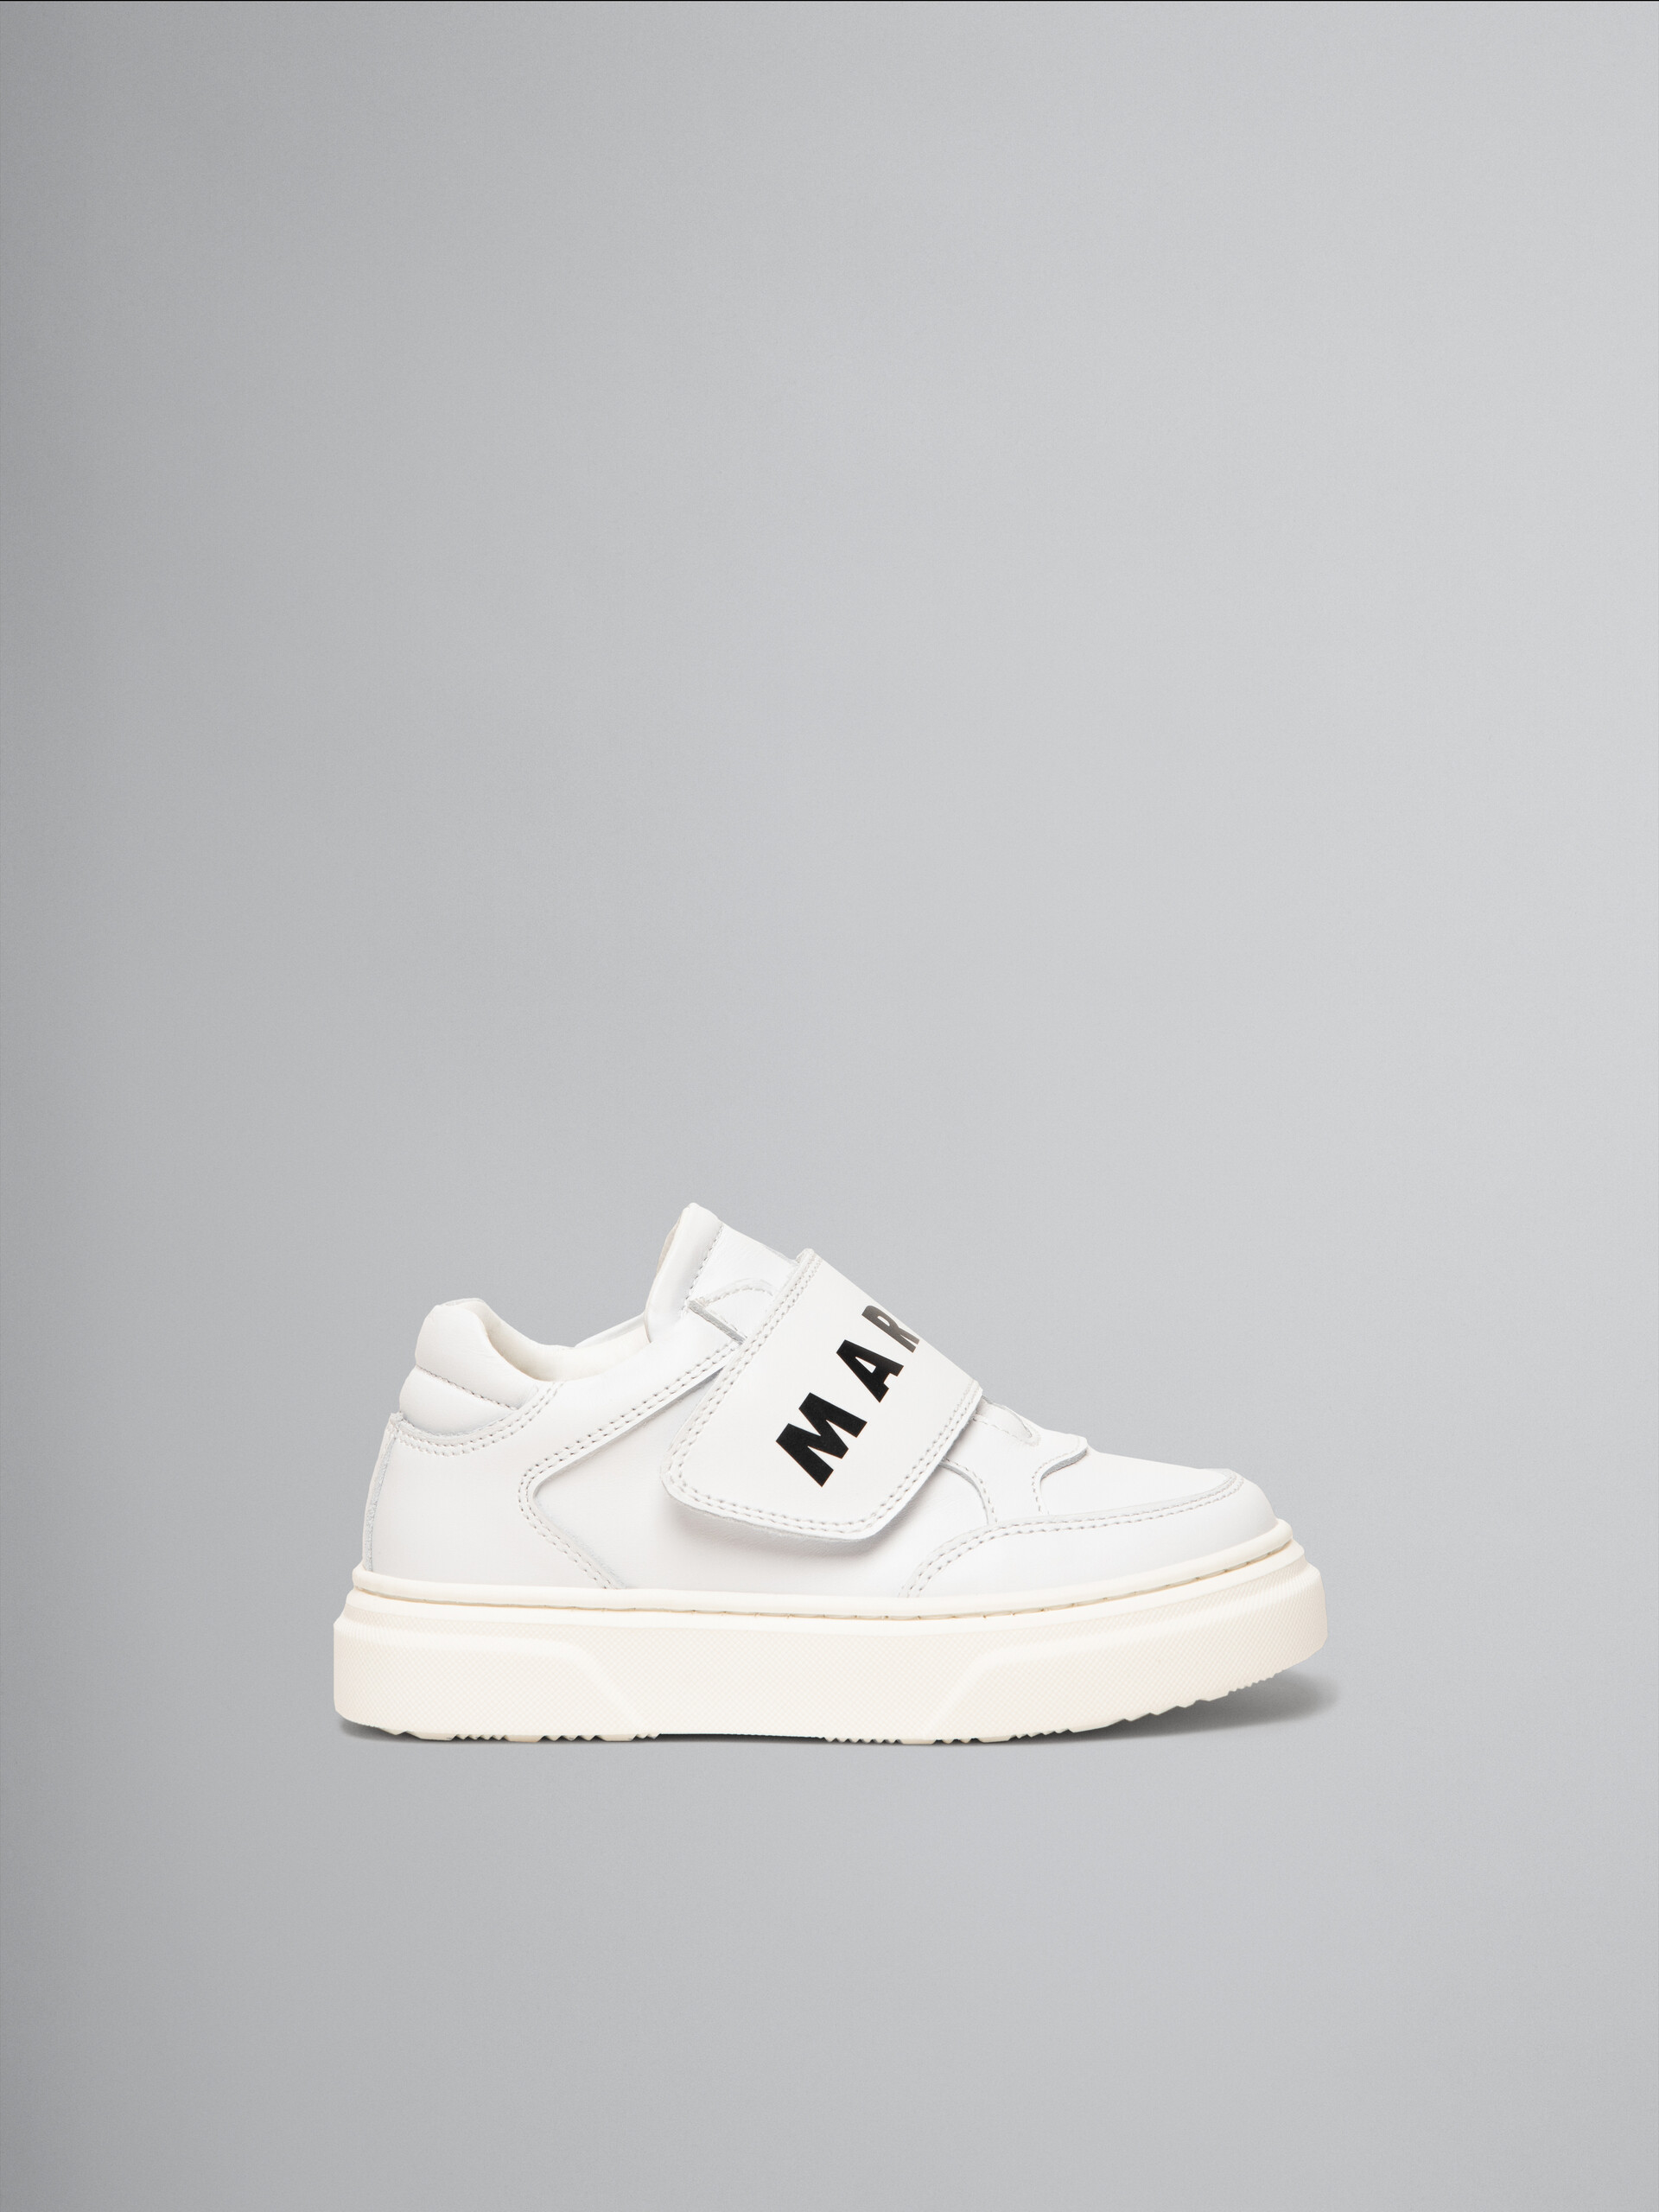 White leather sneaker with maxi strap - Other accessories - Image 1